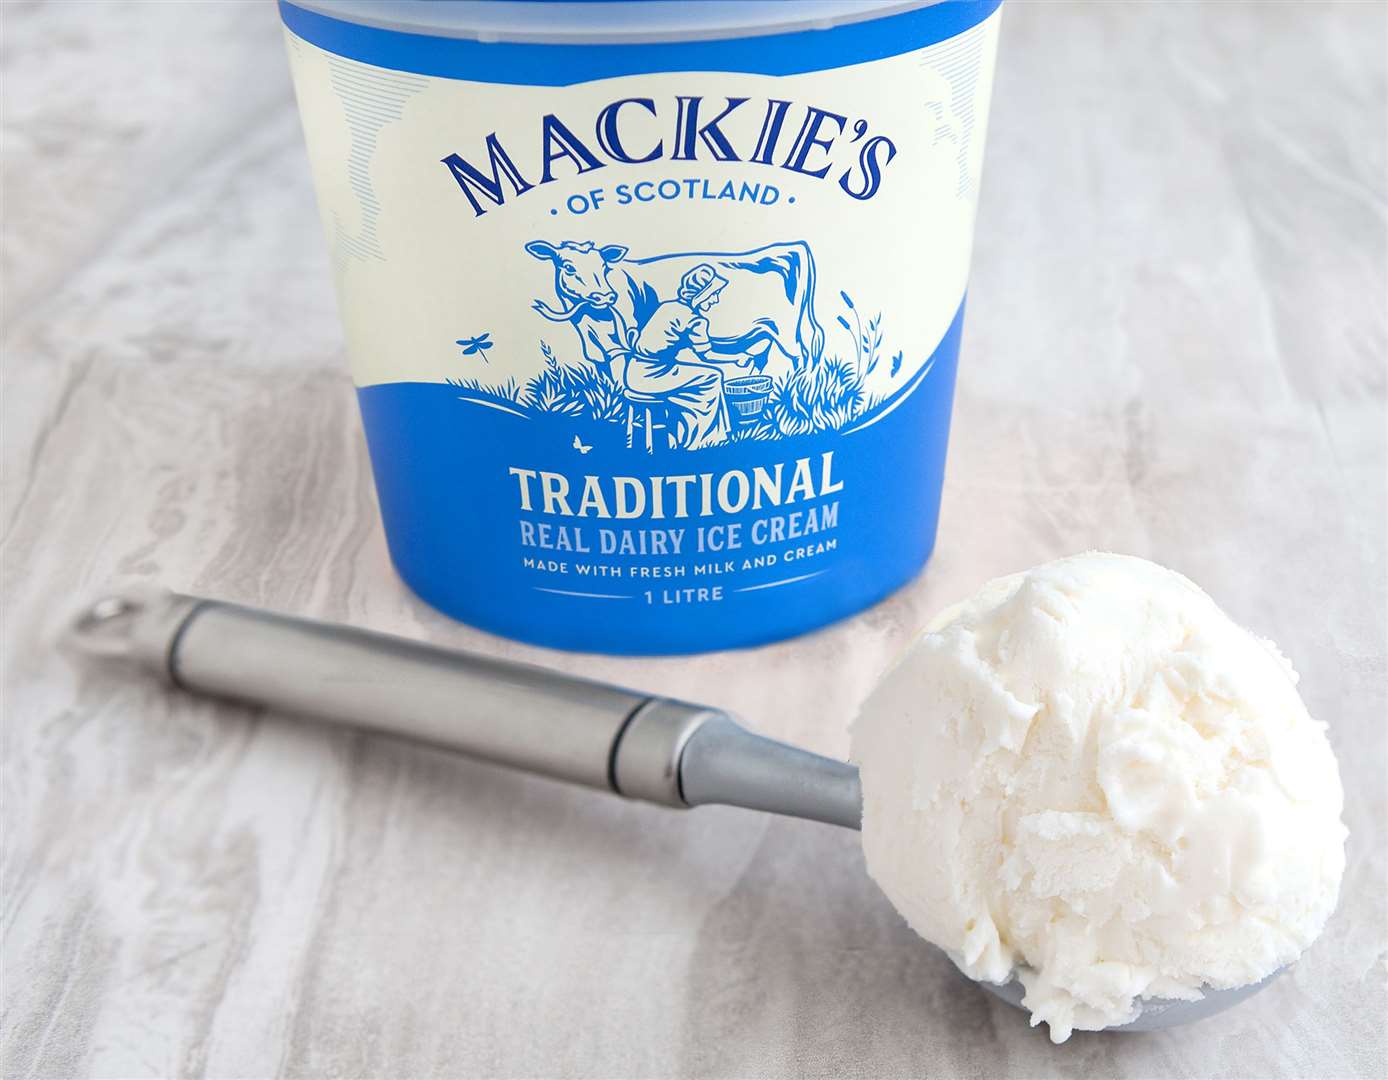 The Traditional flavour one litre ice cream tub.